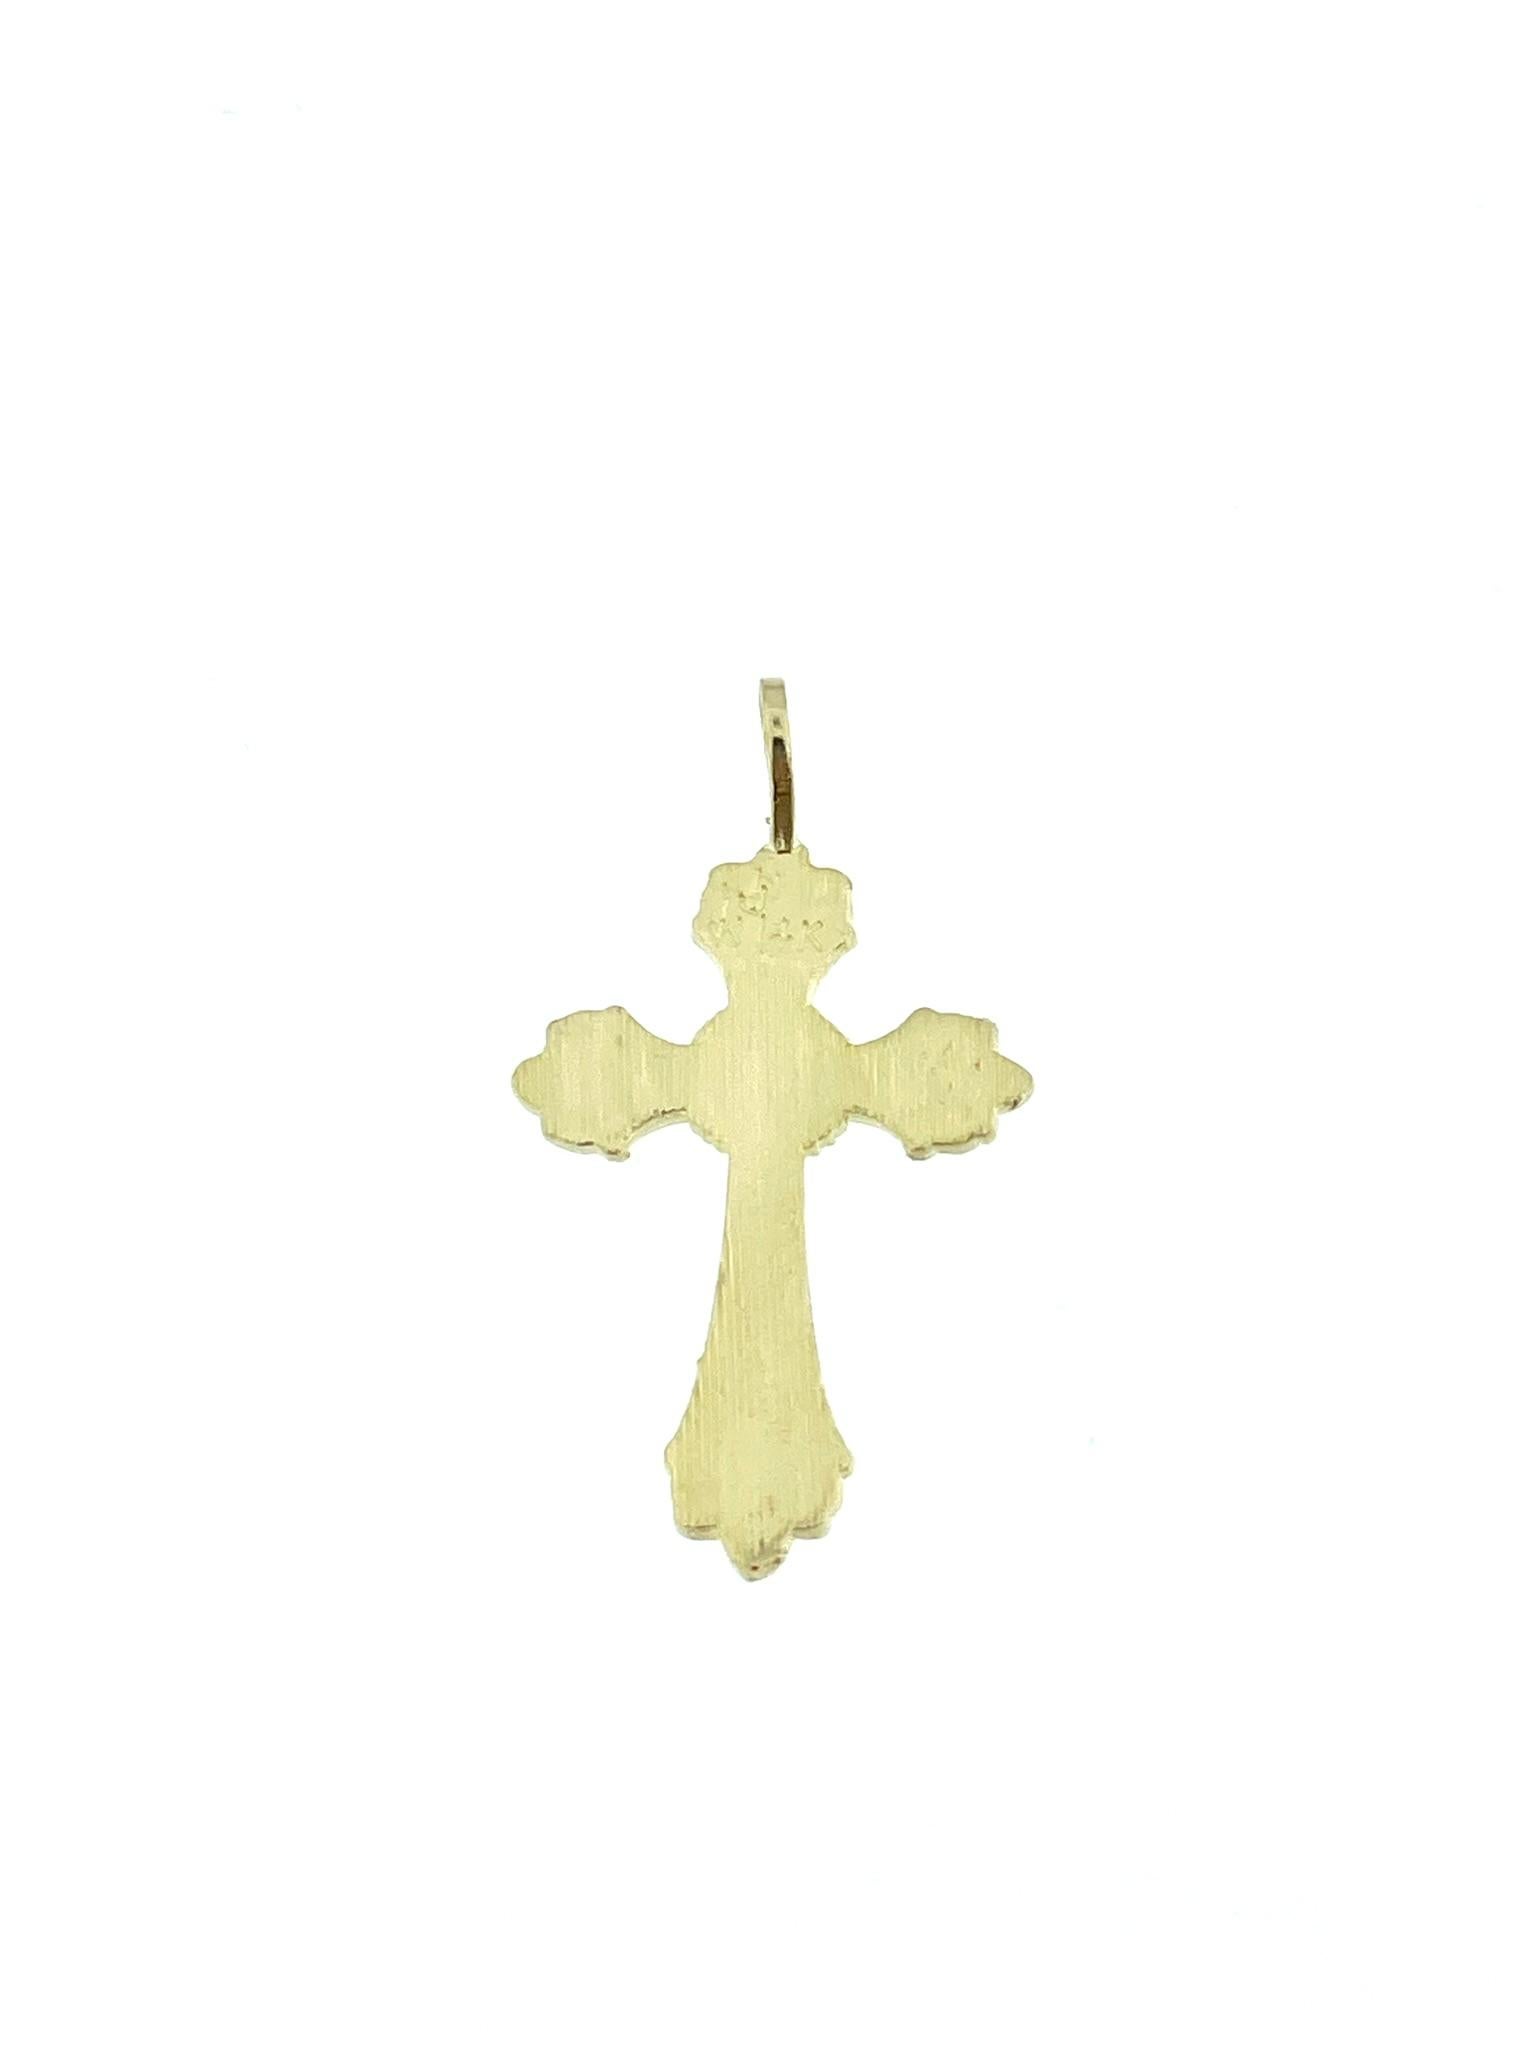 The German Modern Cross Yellow Gold is a contemporary interpretation of a classic religious symbol, crafted with elegance and sophistication. Made from 14-karat yellow gold, this cross pendant exudes luxury and quality.

The use of 14-karat gold